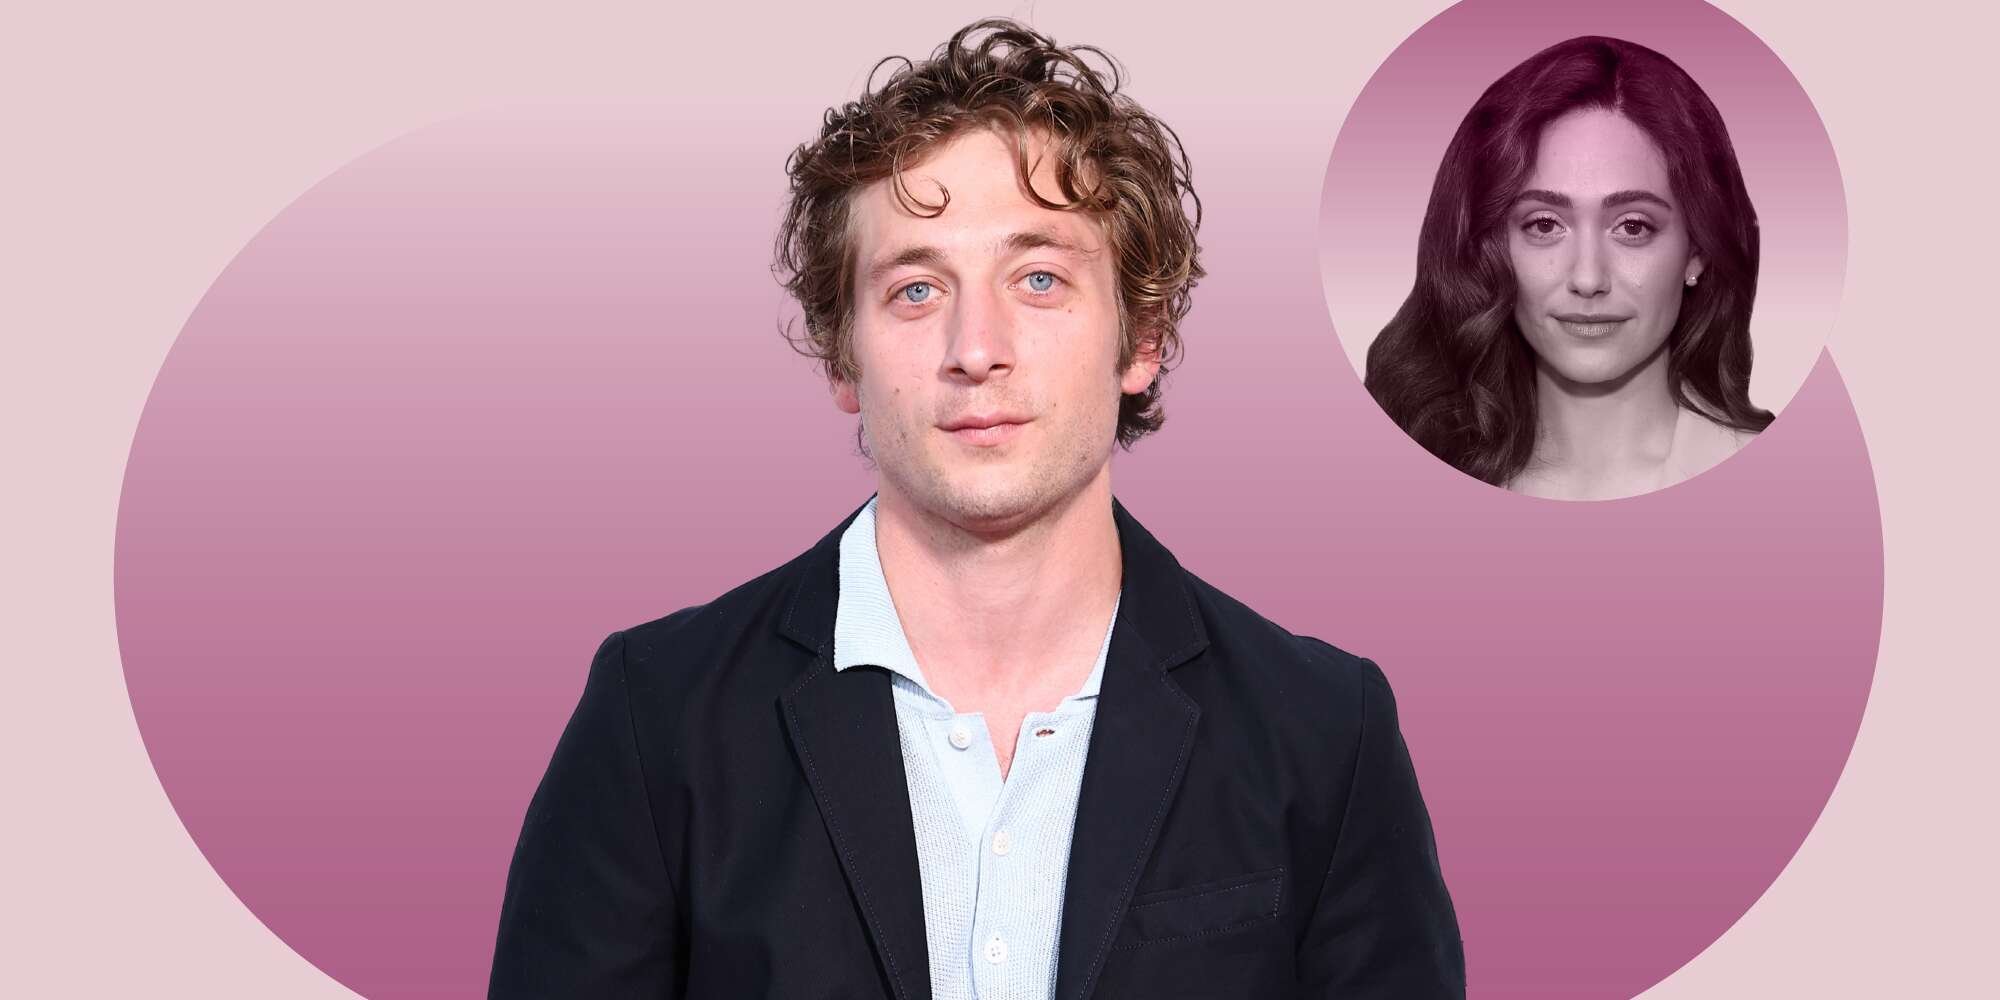 Emmy Rossum celebrates 'magnetic' Jeremy Allen White for EW's 2022 Entertainers of the Year